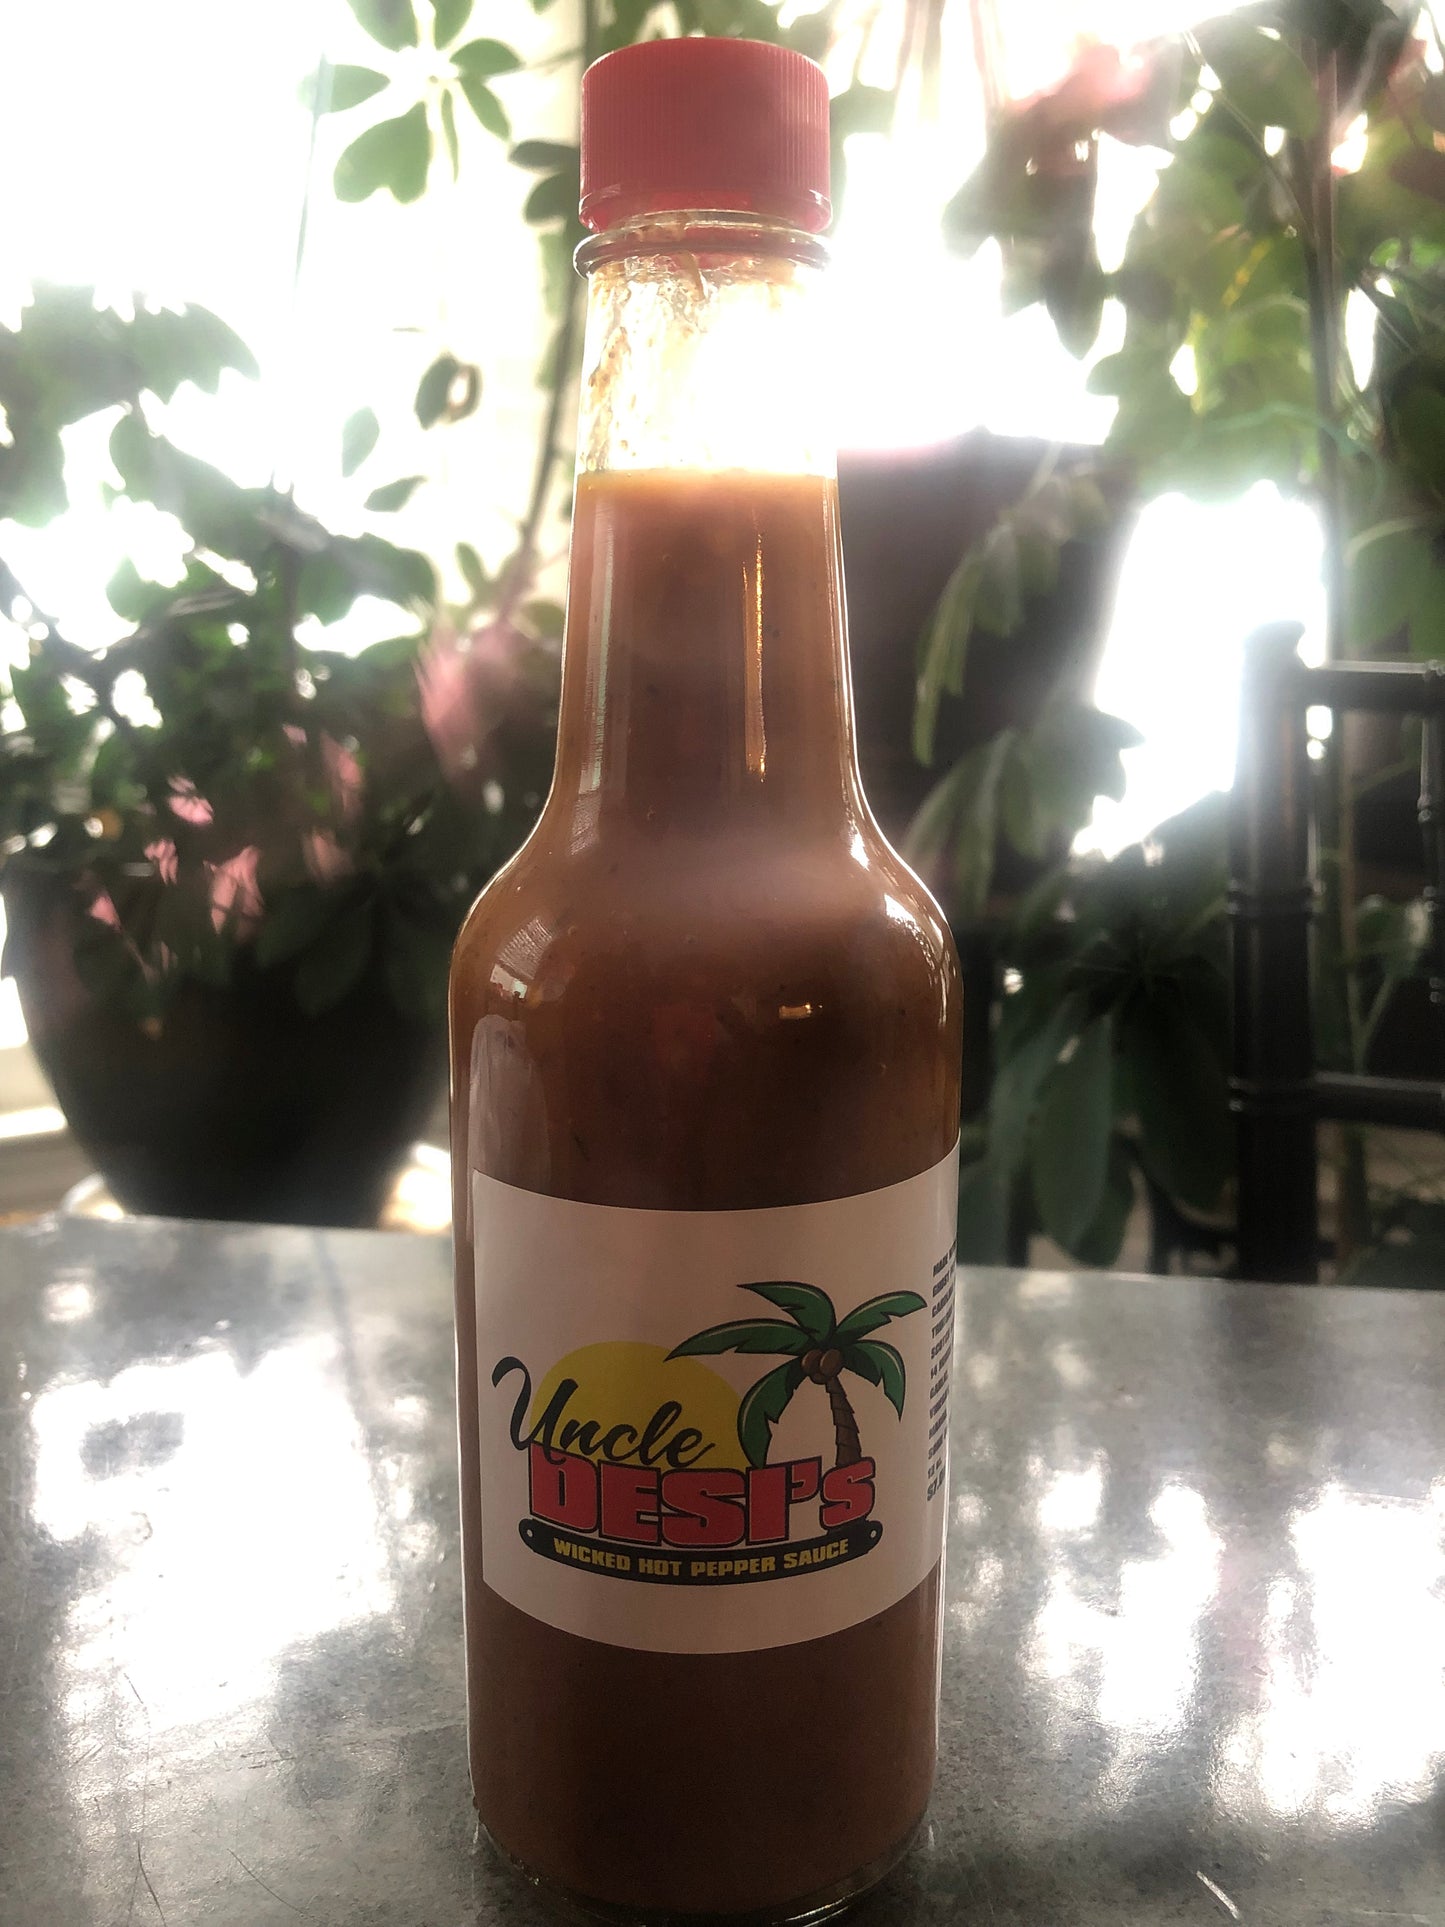 Uncle Desi’s Wicked Hot Pepper Sauce